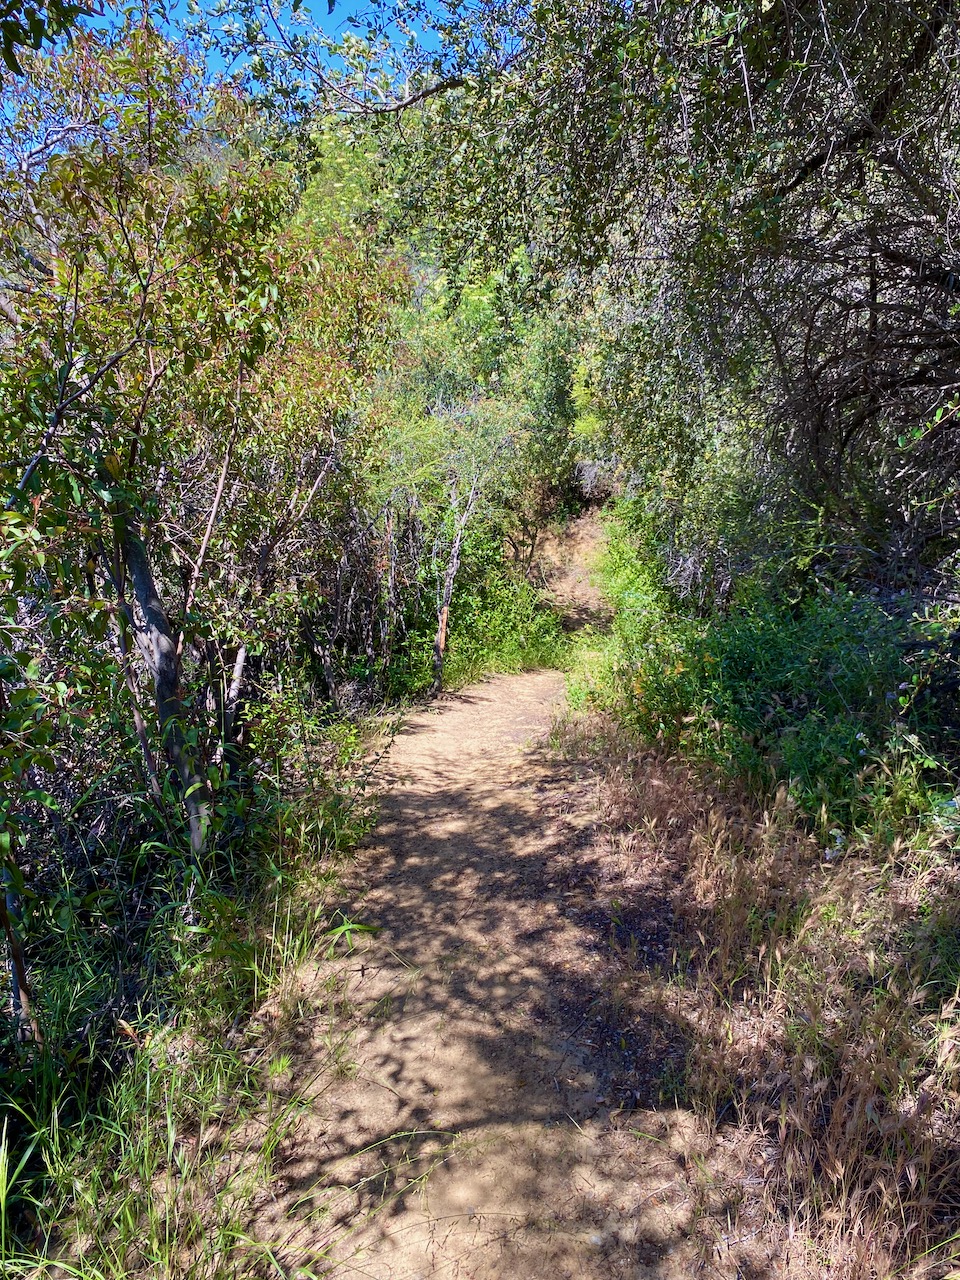 Looking west along the Garapito Canyon Trail